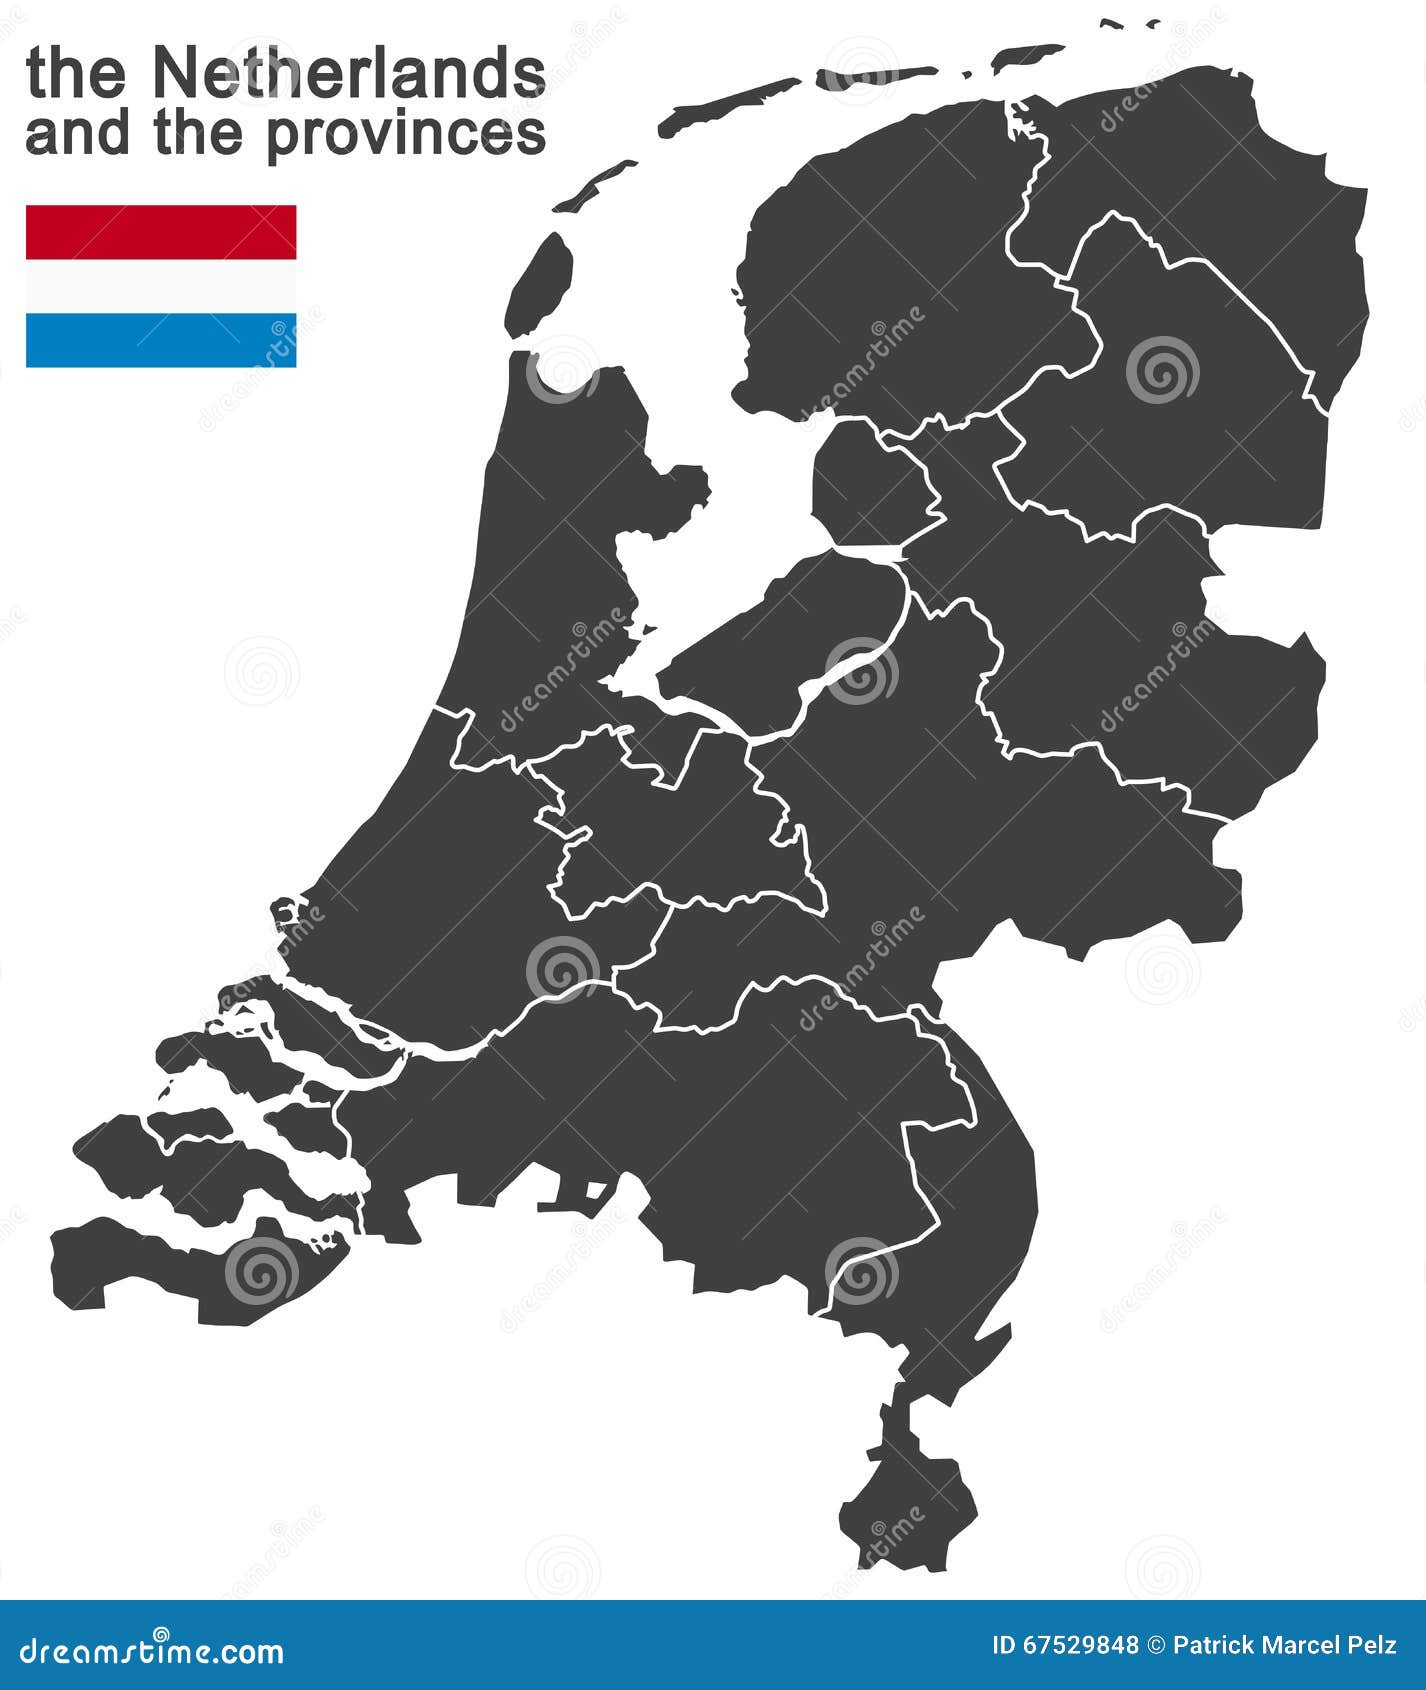 the netherlands and provinces